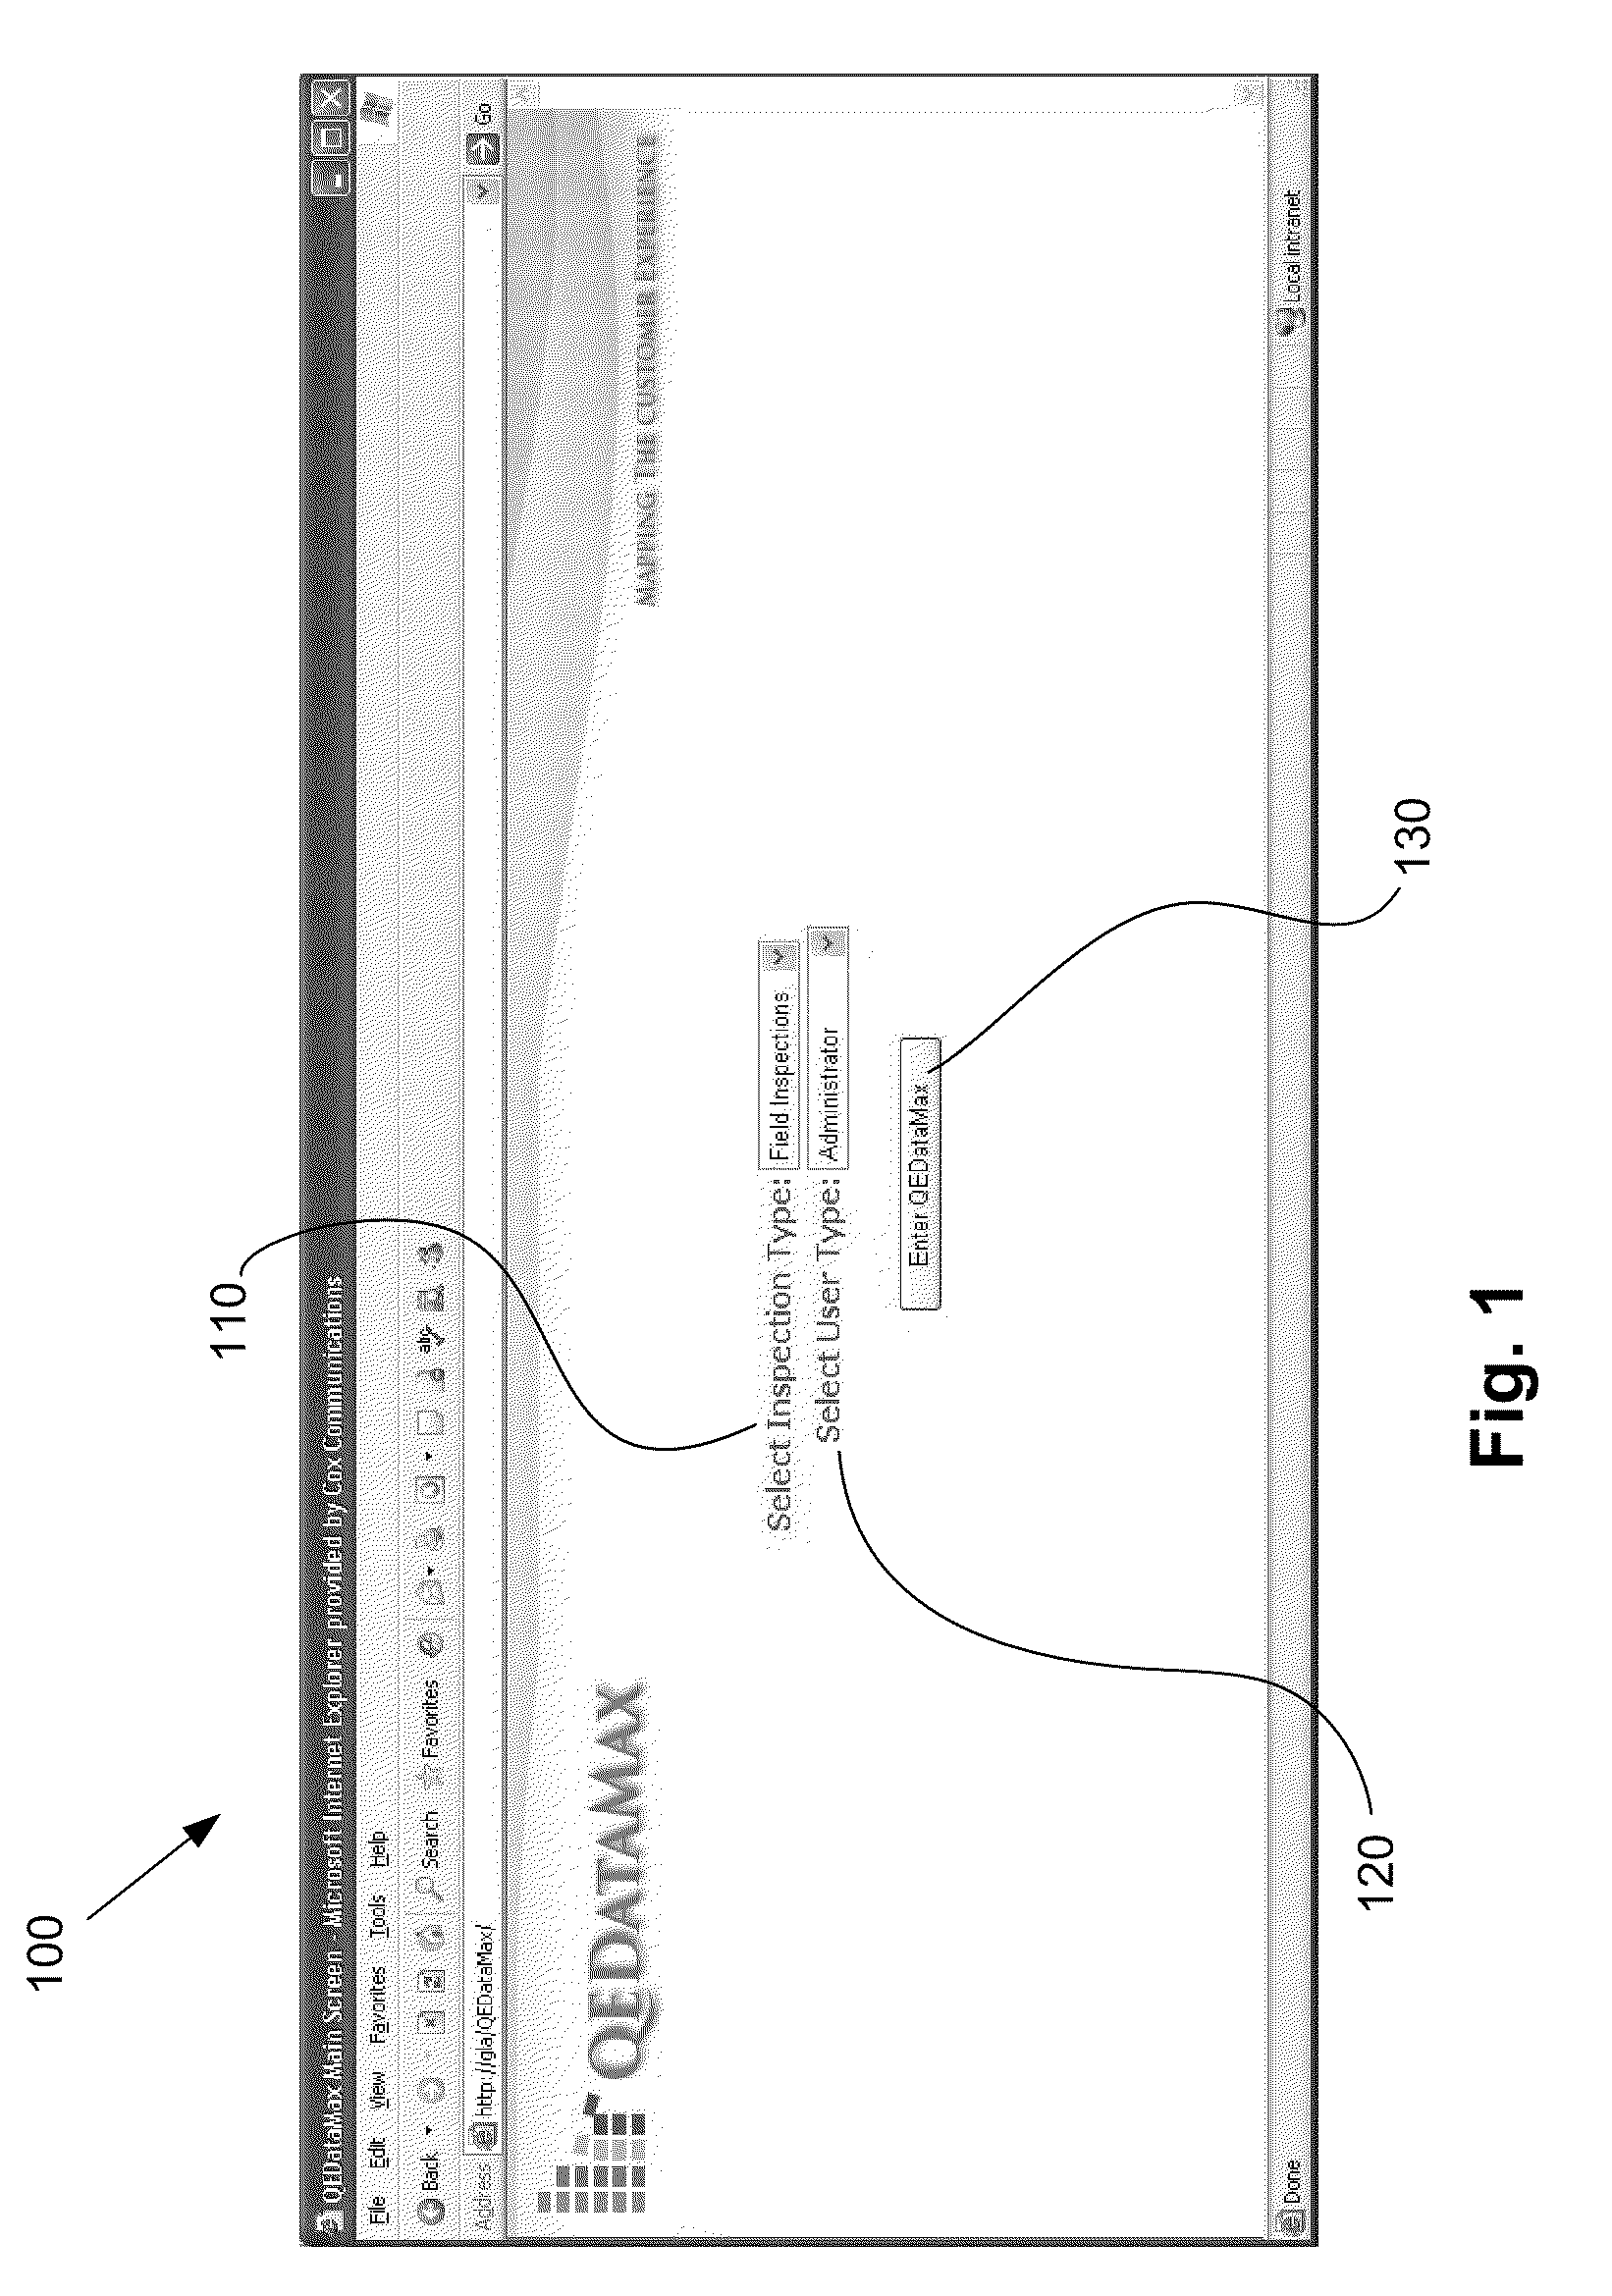 Real-Time Quality Data and Feedback for Field Inspection Systems and Methods